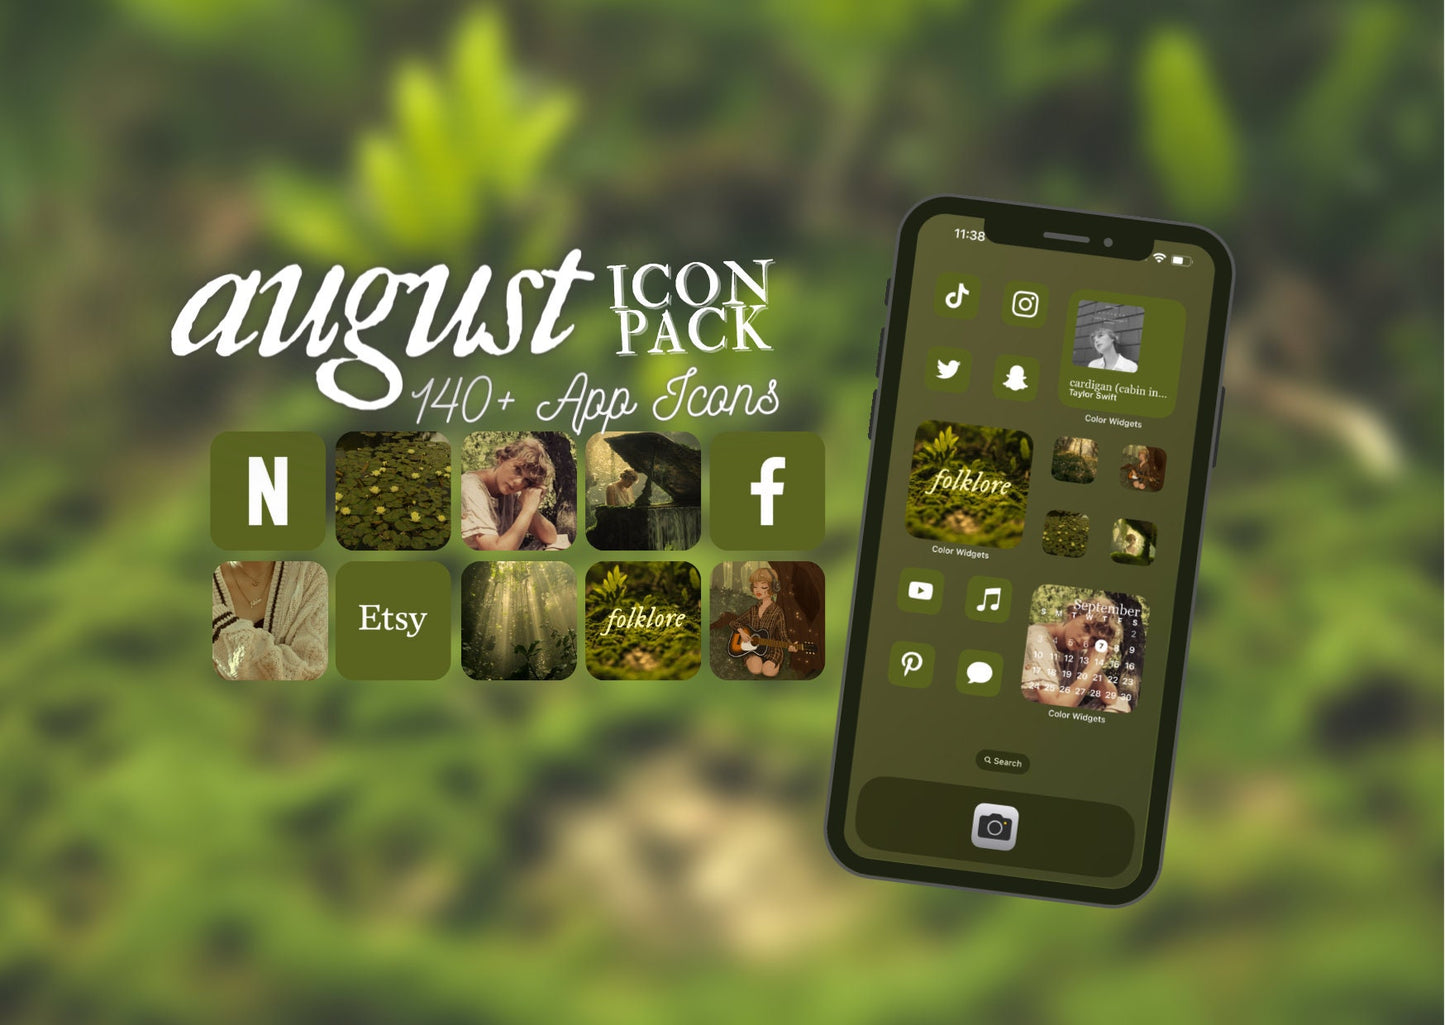 Folklore "August" App Icons | For iPhone, iPad, Android, Custom Widgets, Phone Theme, Swiftie